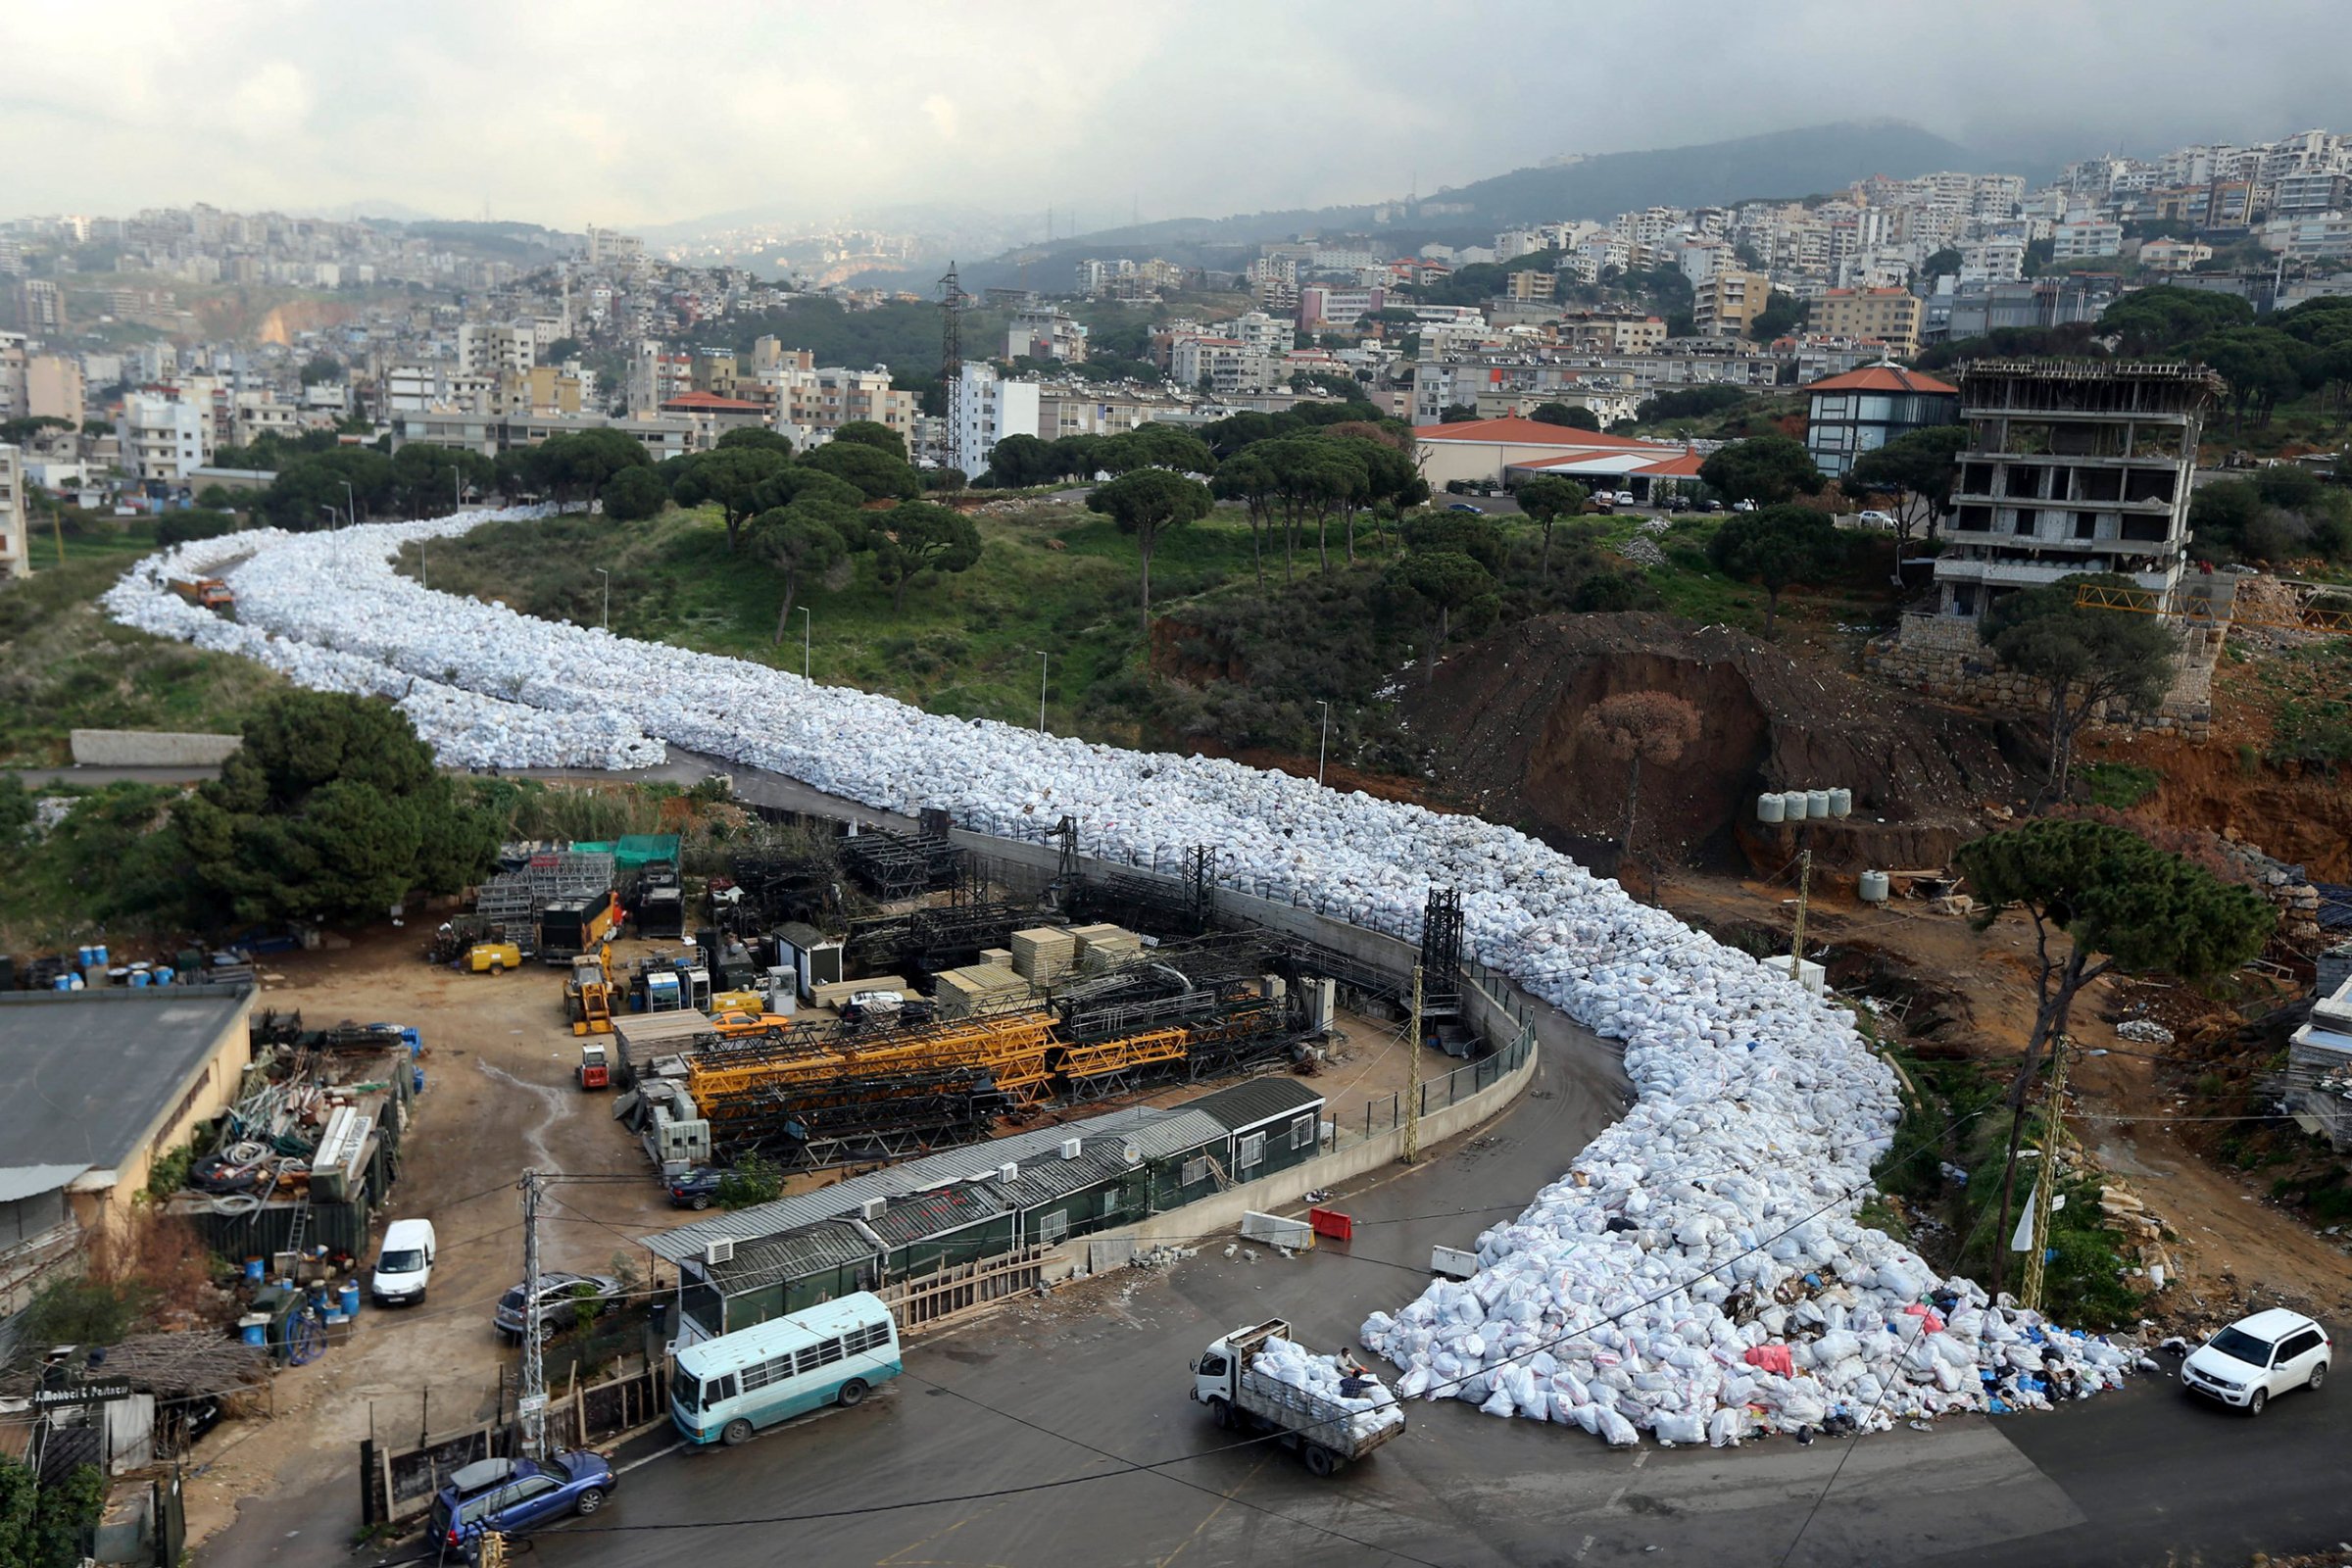 Thousands of packed garbage bags in Jdeideh, a northern suburb of Beirut, Lebanon, Feb. 23, 2016. The country has struggled to resolve its trash crisis since last summer.